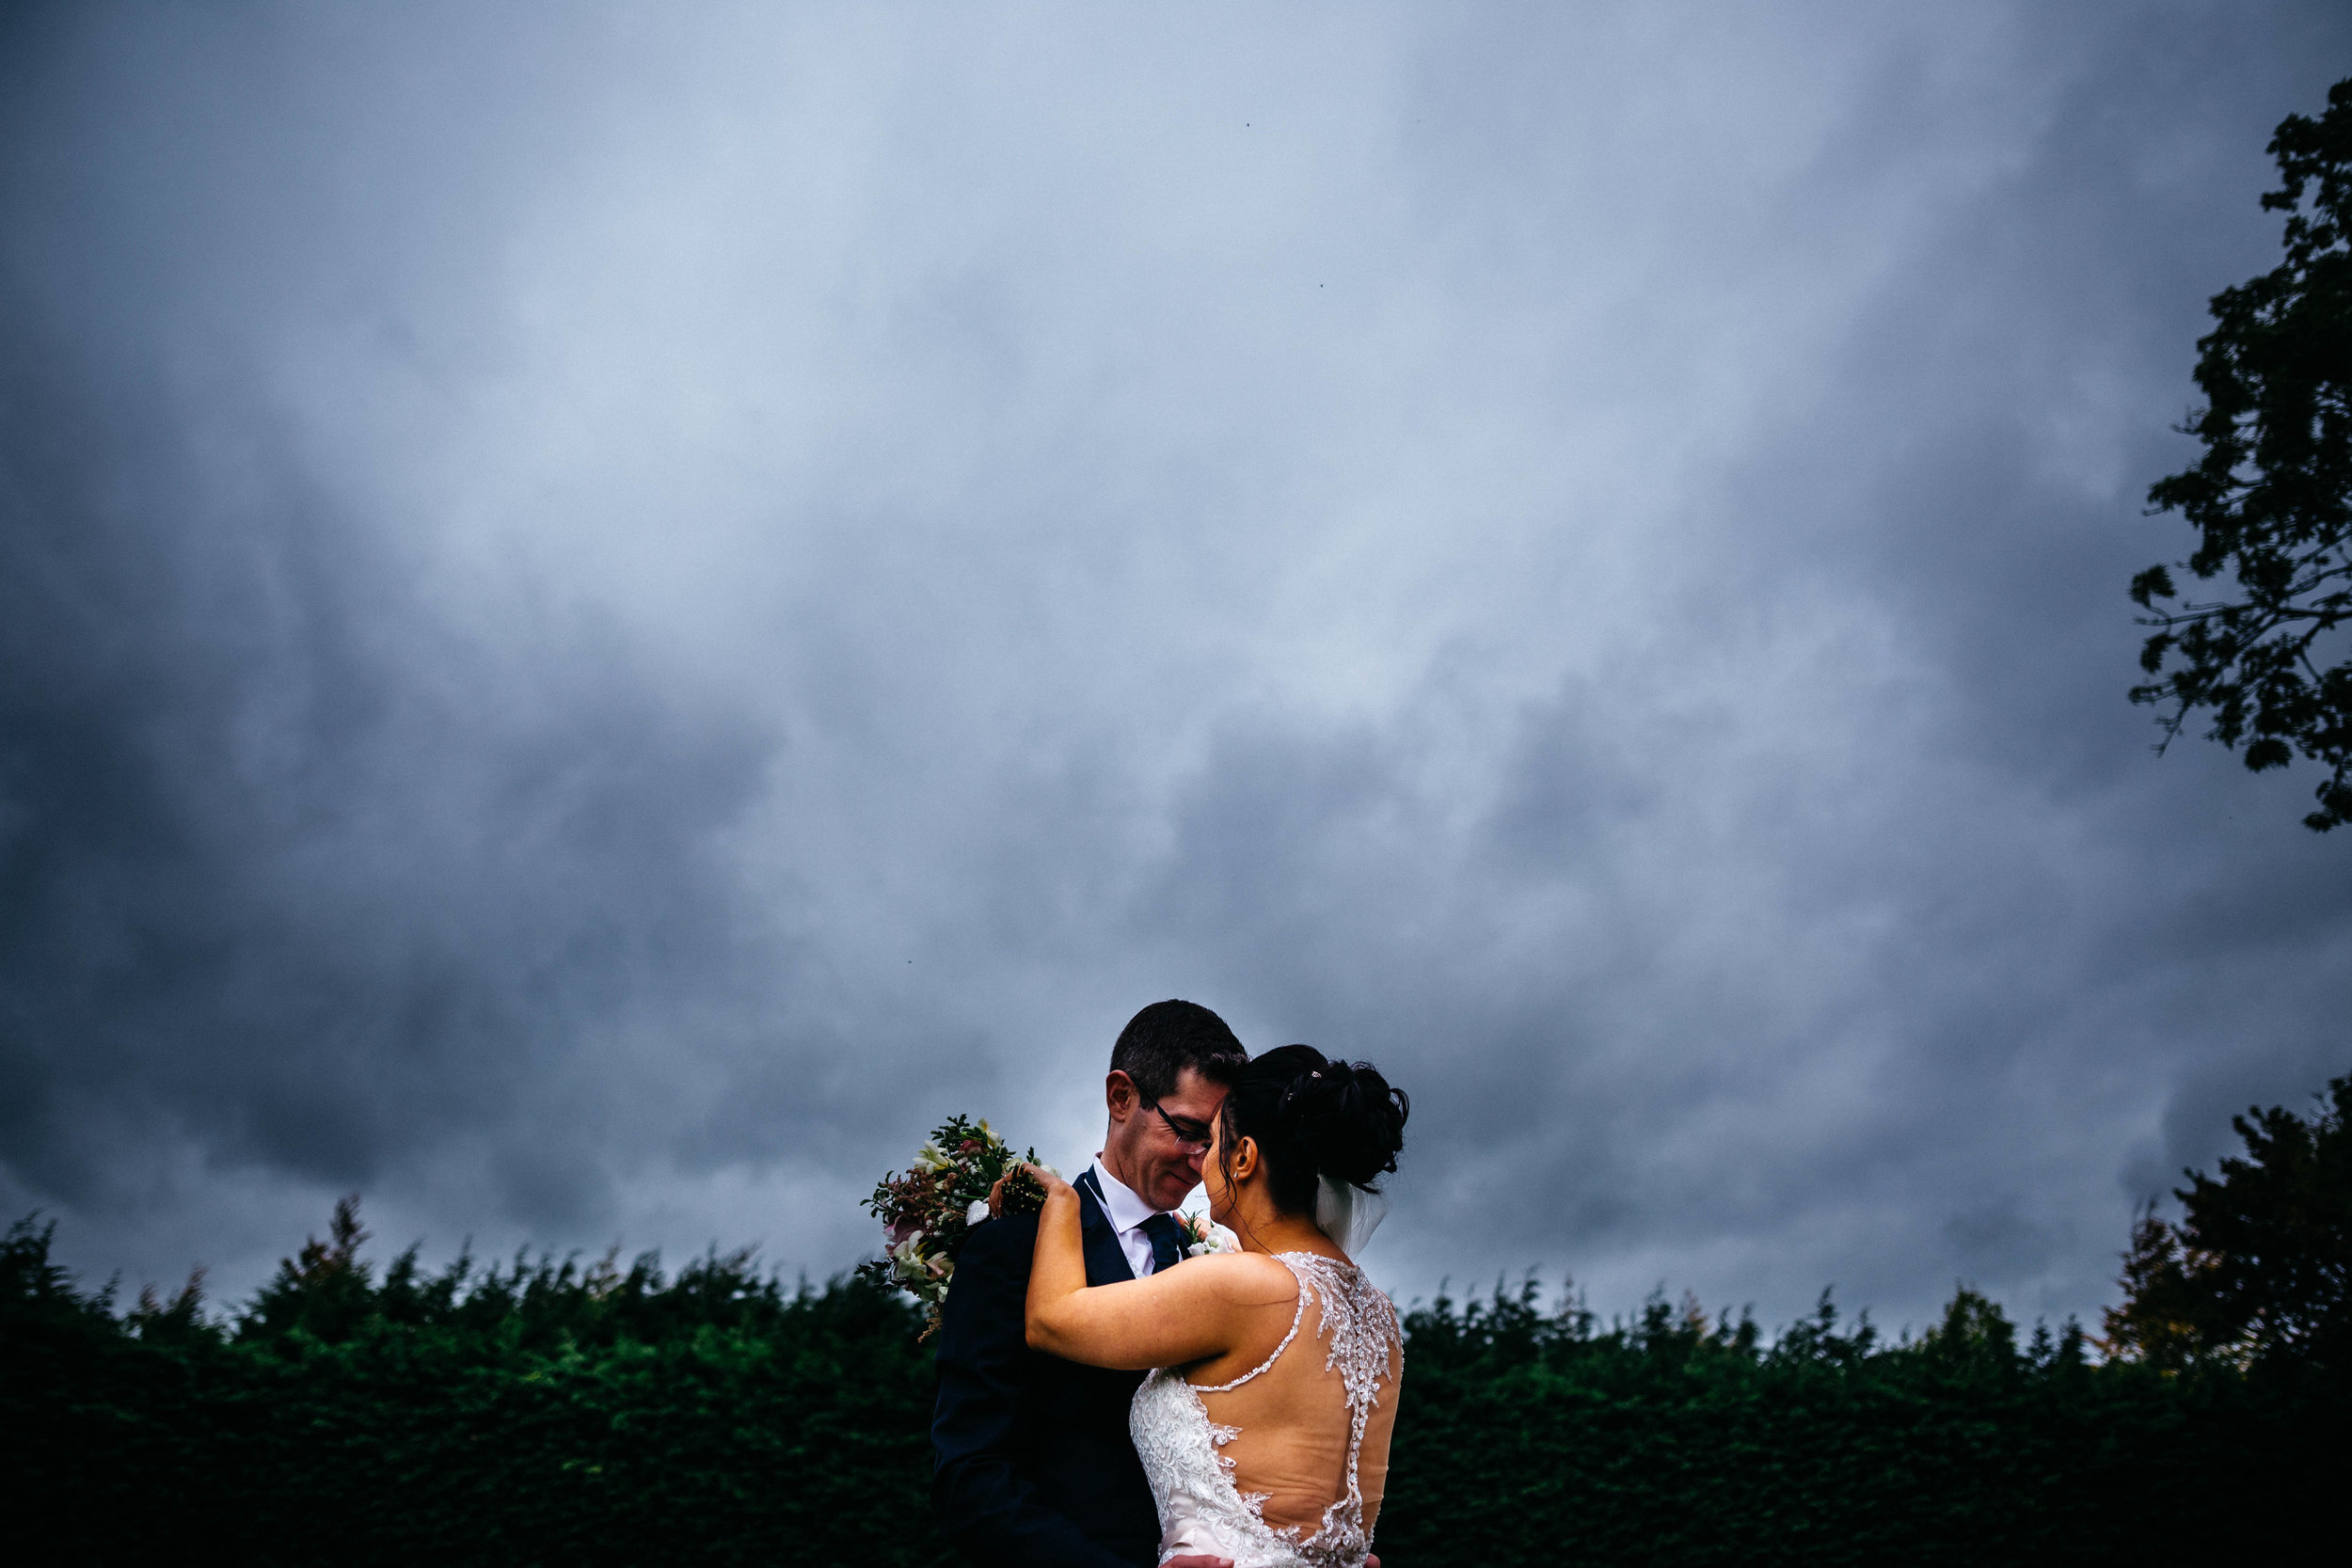 The bride and groom at Winters Barns